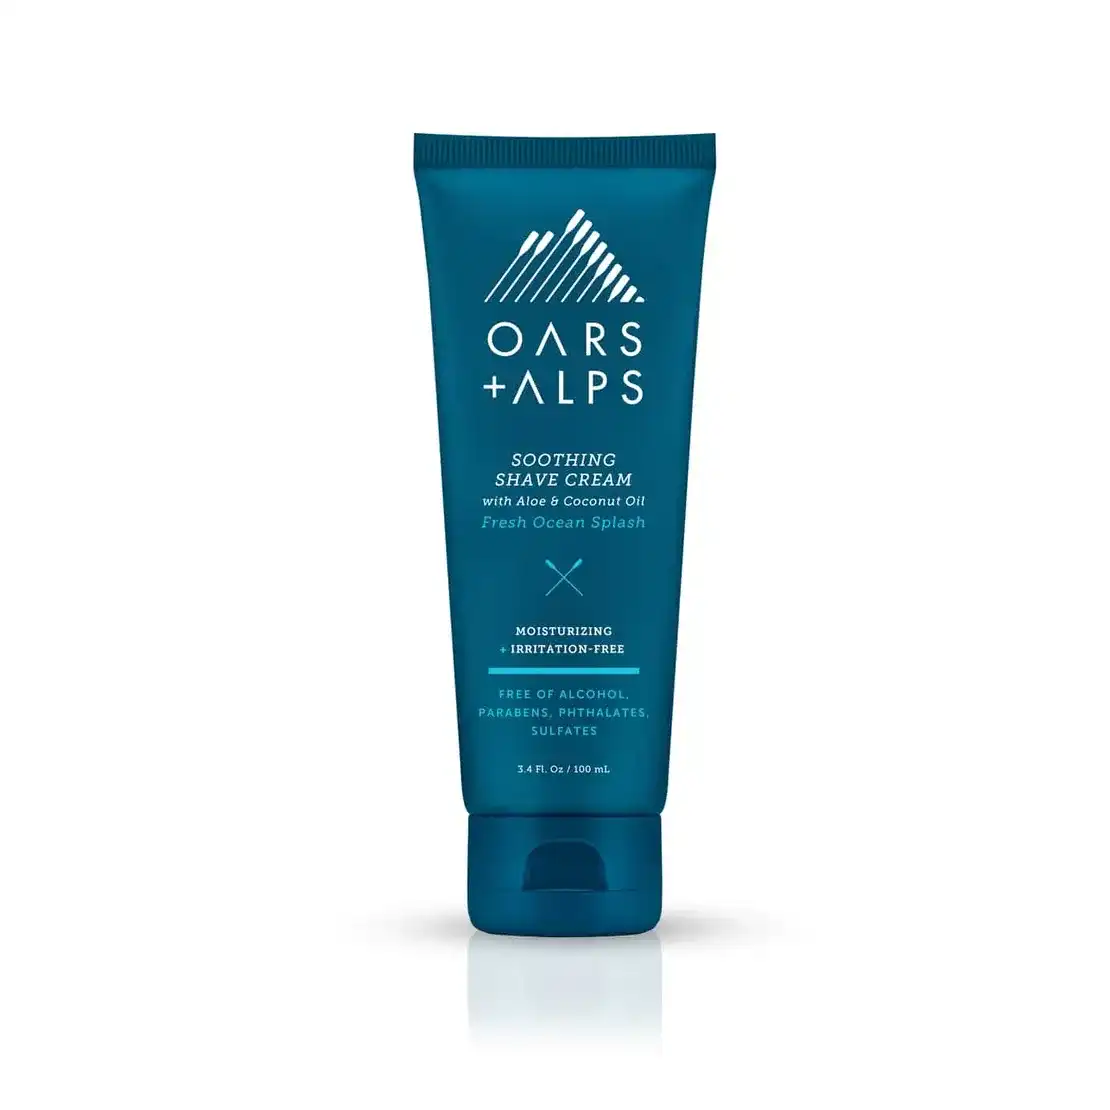 Oars + Alps Soothing Shave Cream